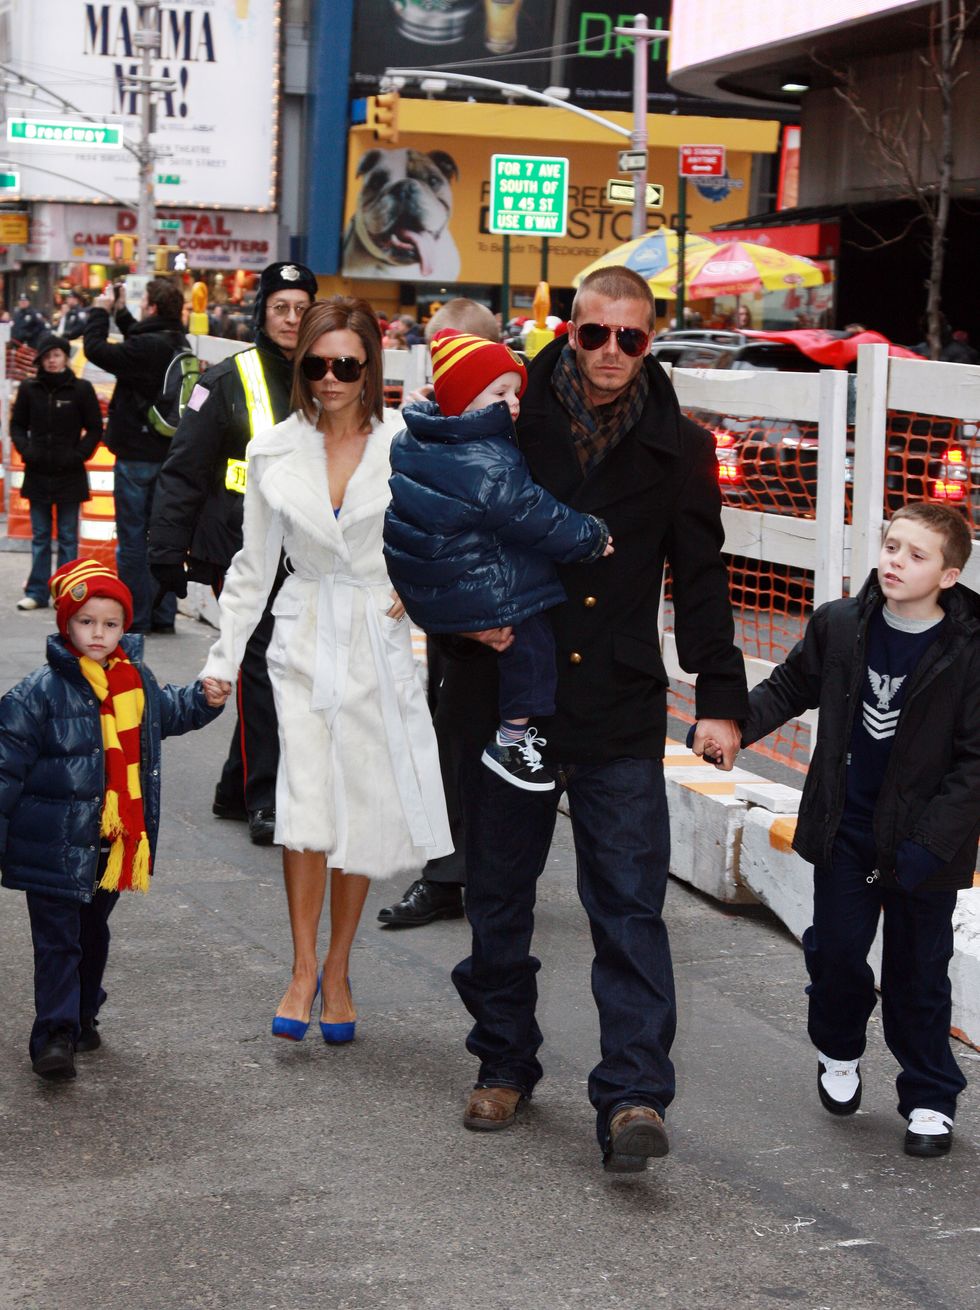 The Beckhams Visit "The Little Mermaid" on Broadway - February 17, 2008